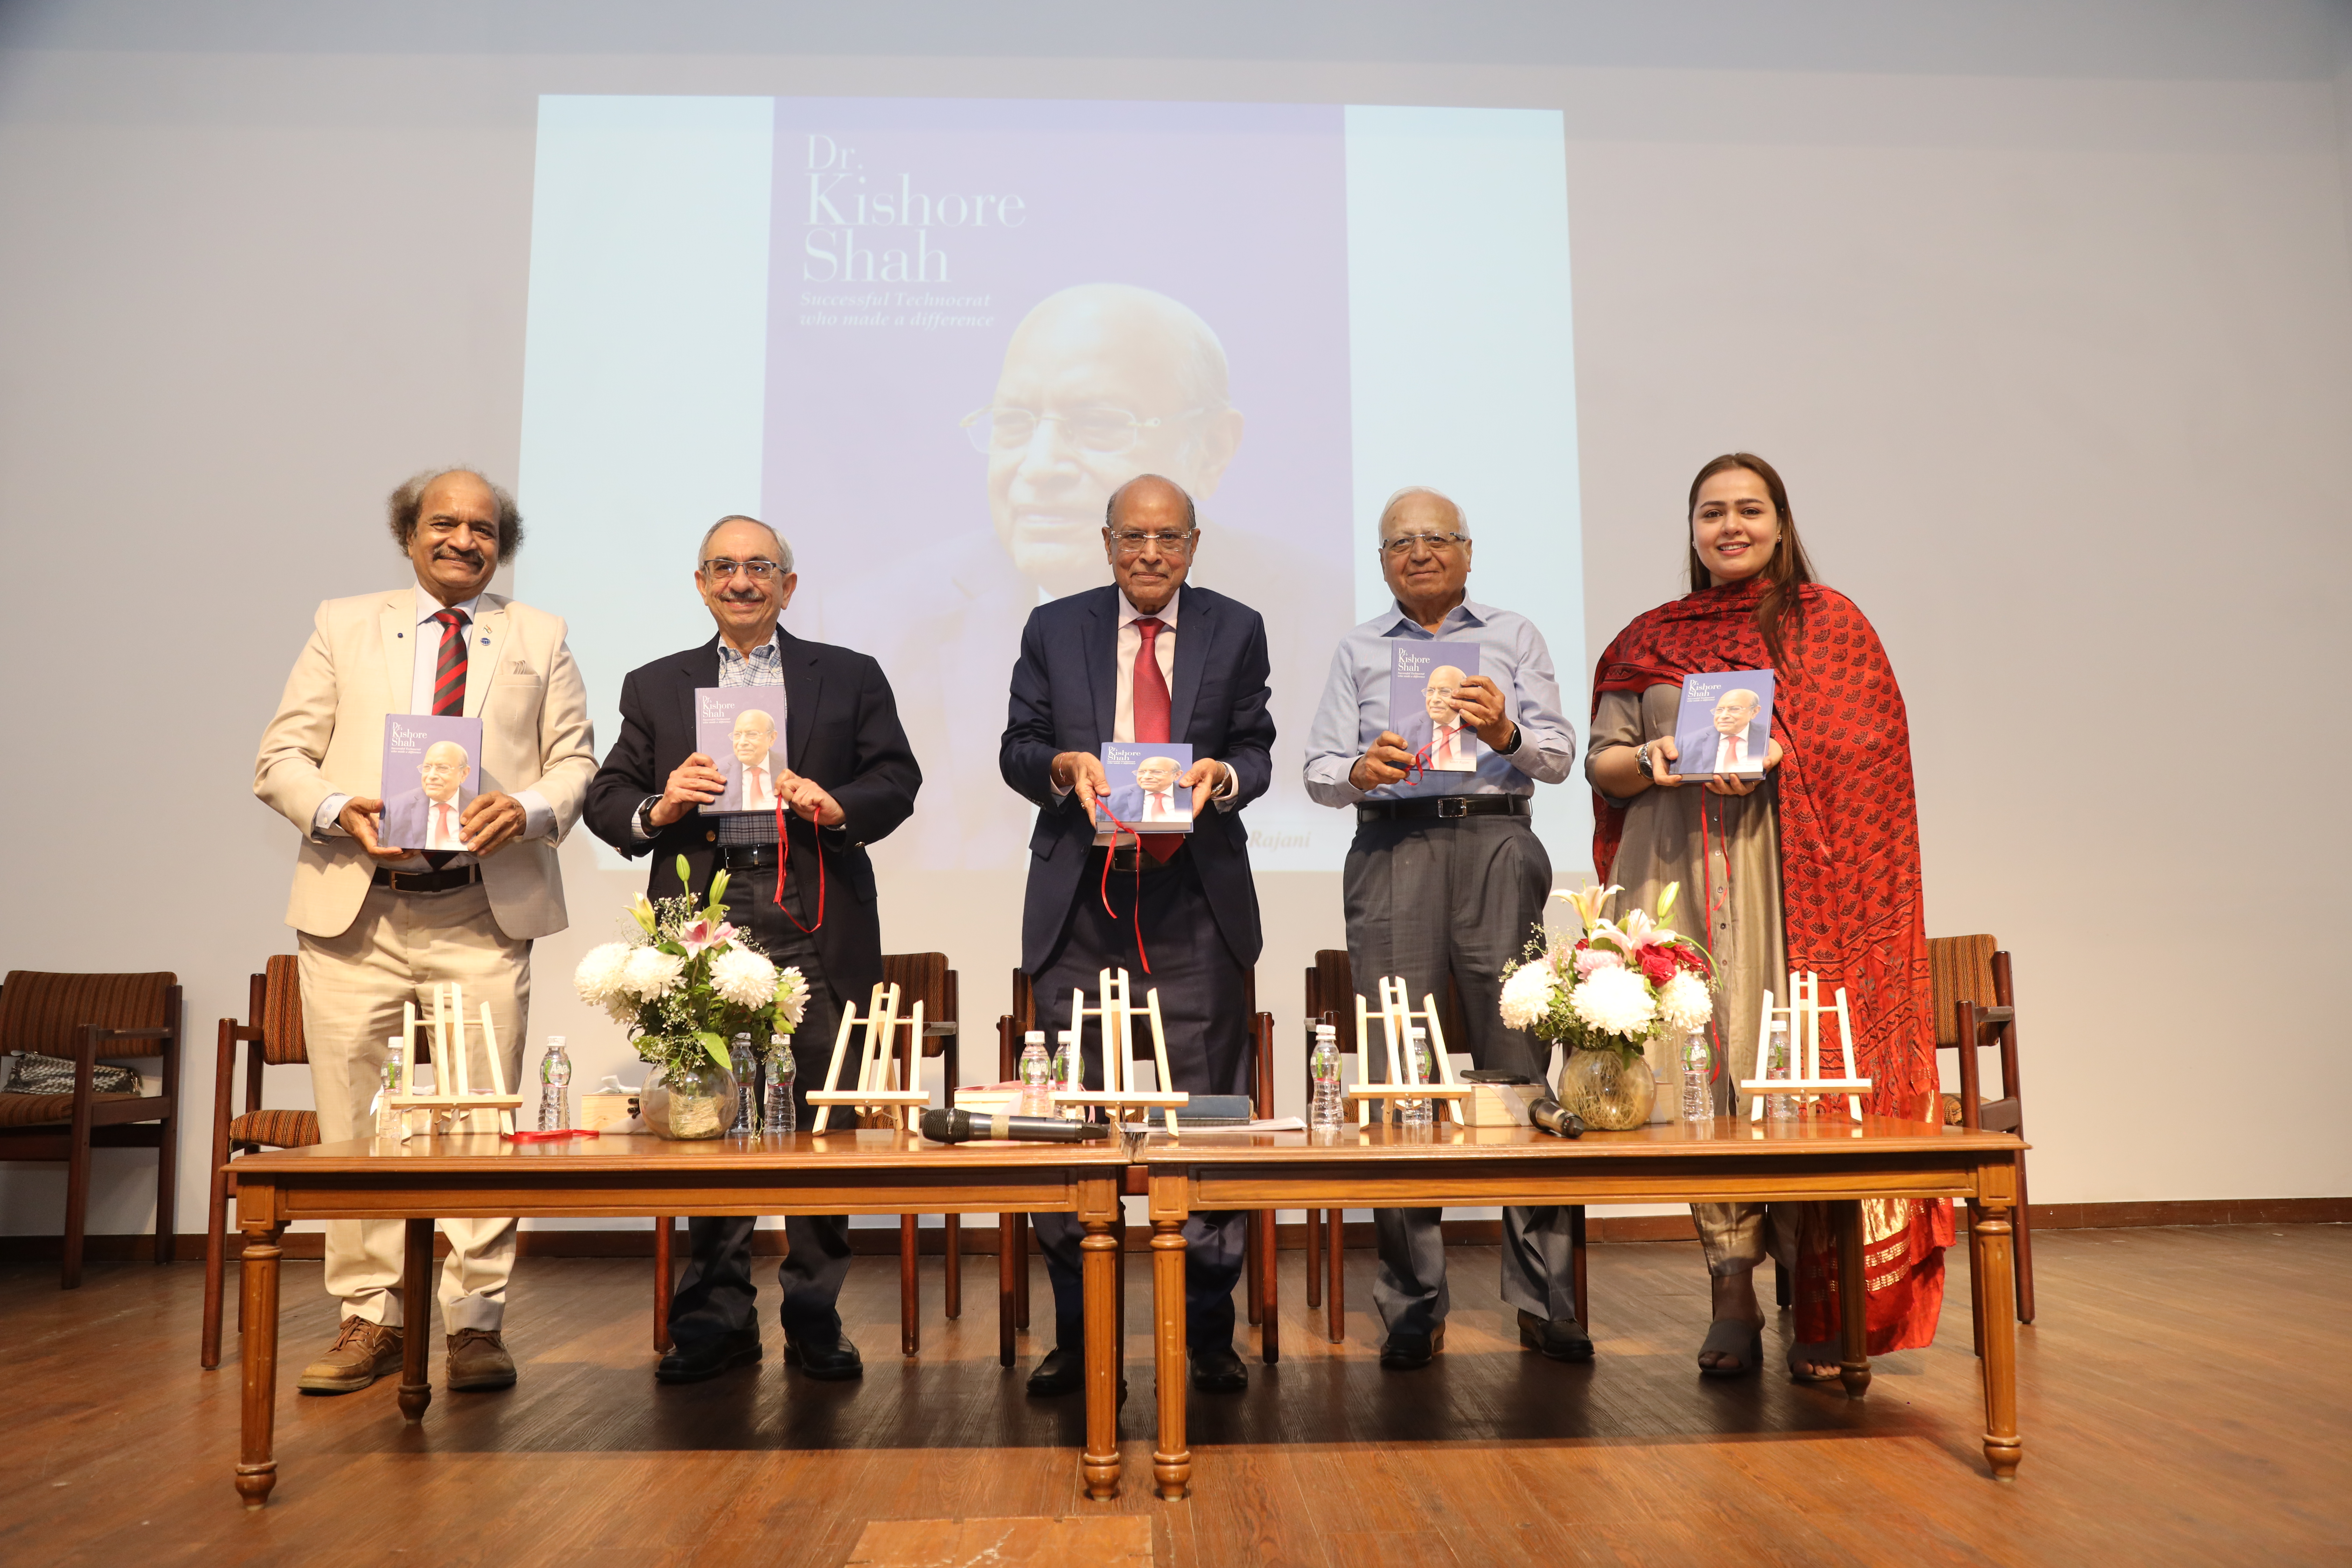 Dr. Kishore Shah’s Biography released